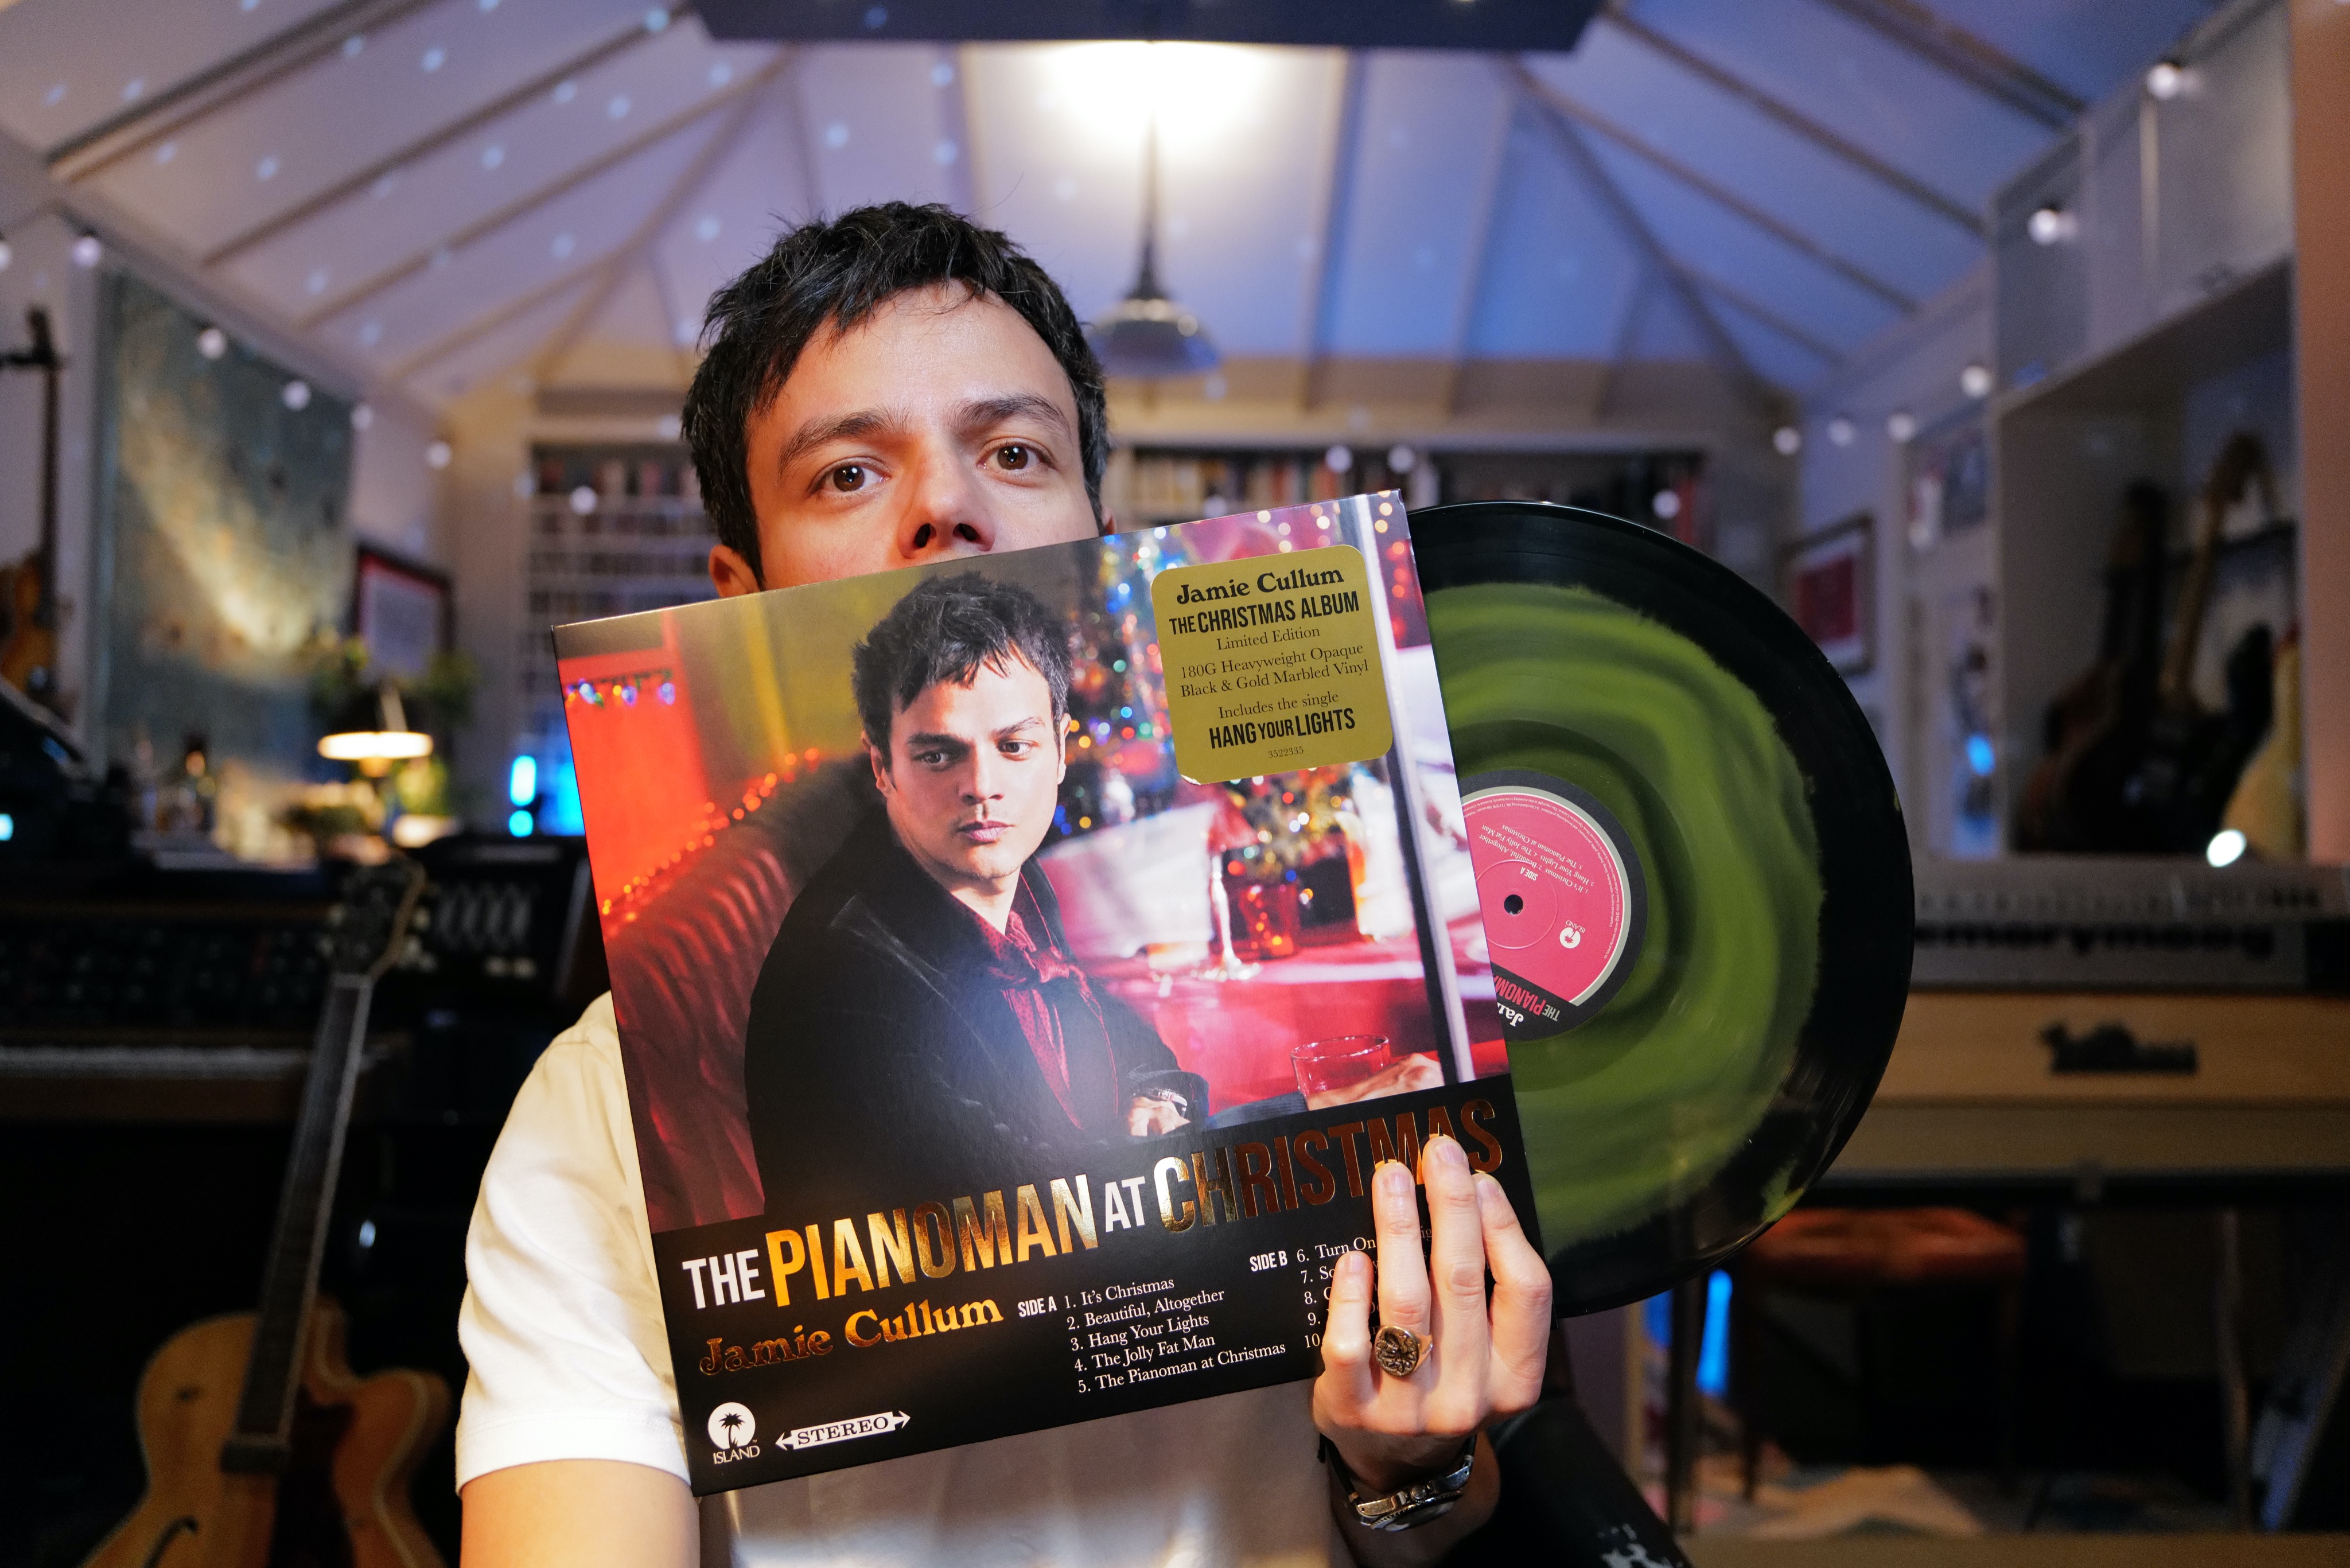 rive ned triathlete Temmelig Jamie Cullum on Twitter: "The Pianoman At Christmas is now available on  vinyl including some beautiful special edition versions. You can probably  guess that it's my preferred format and somehow vinyl feels